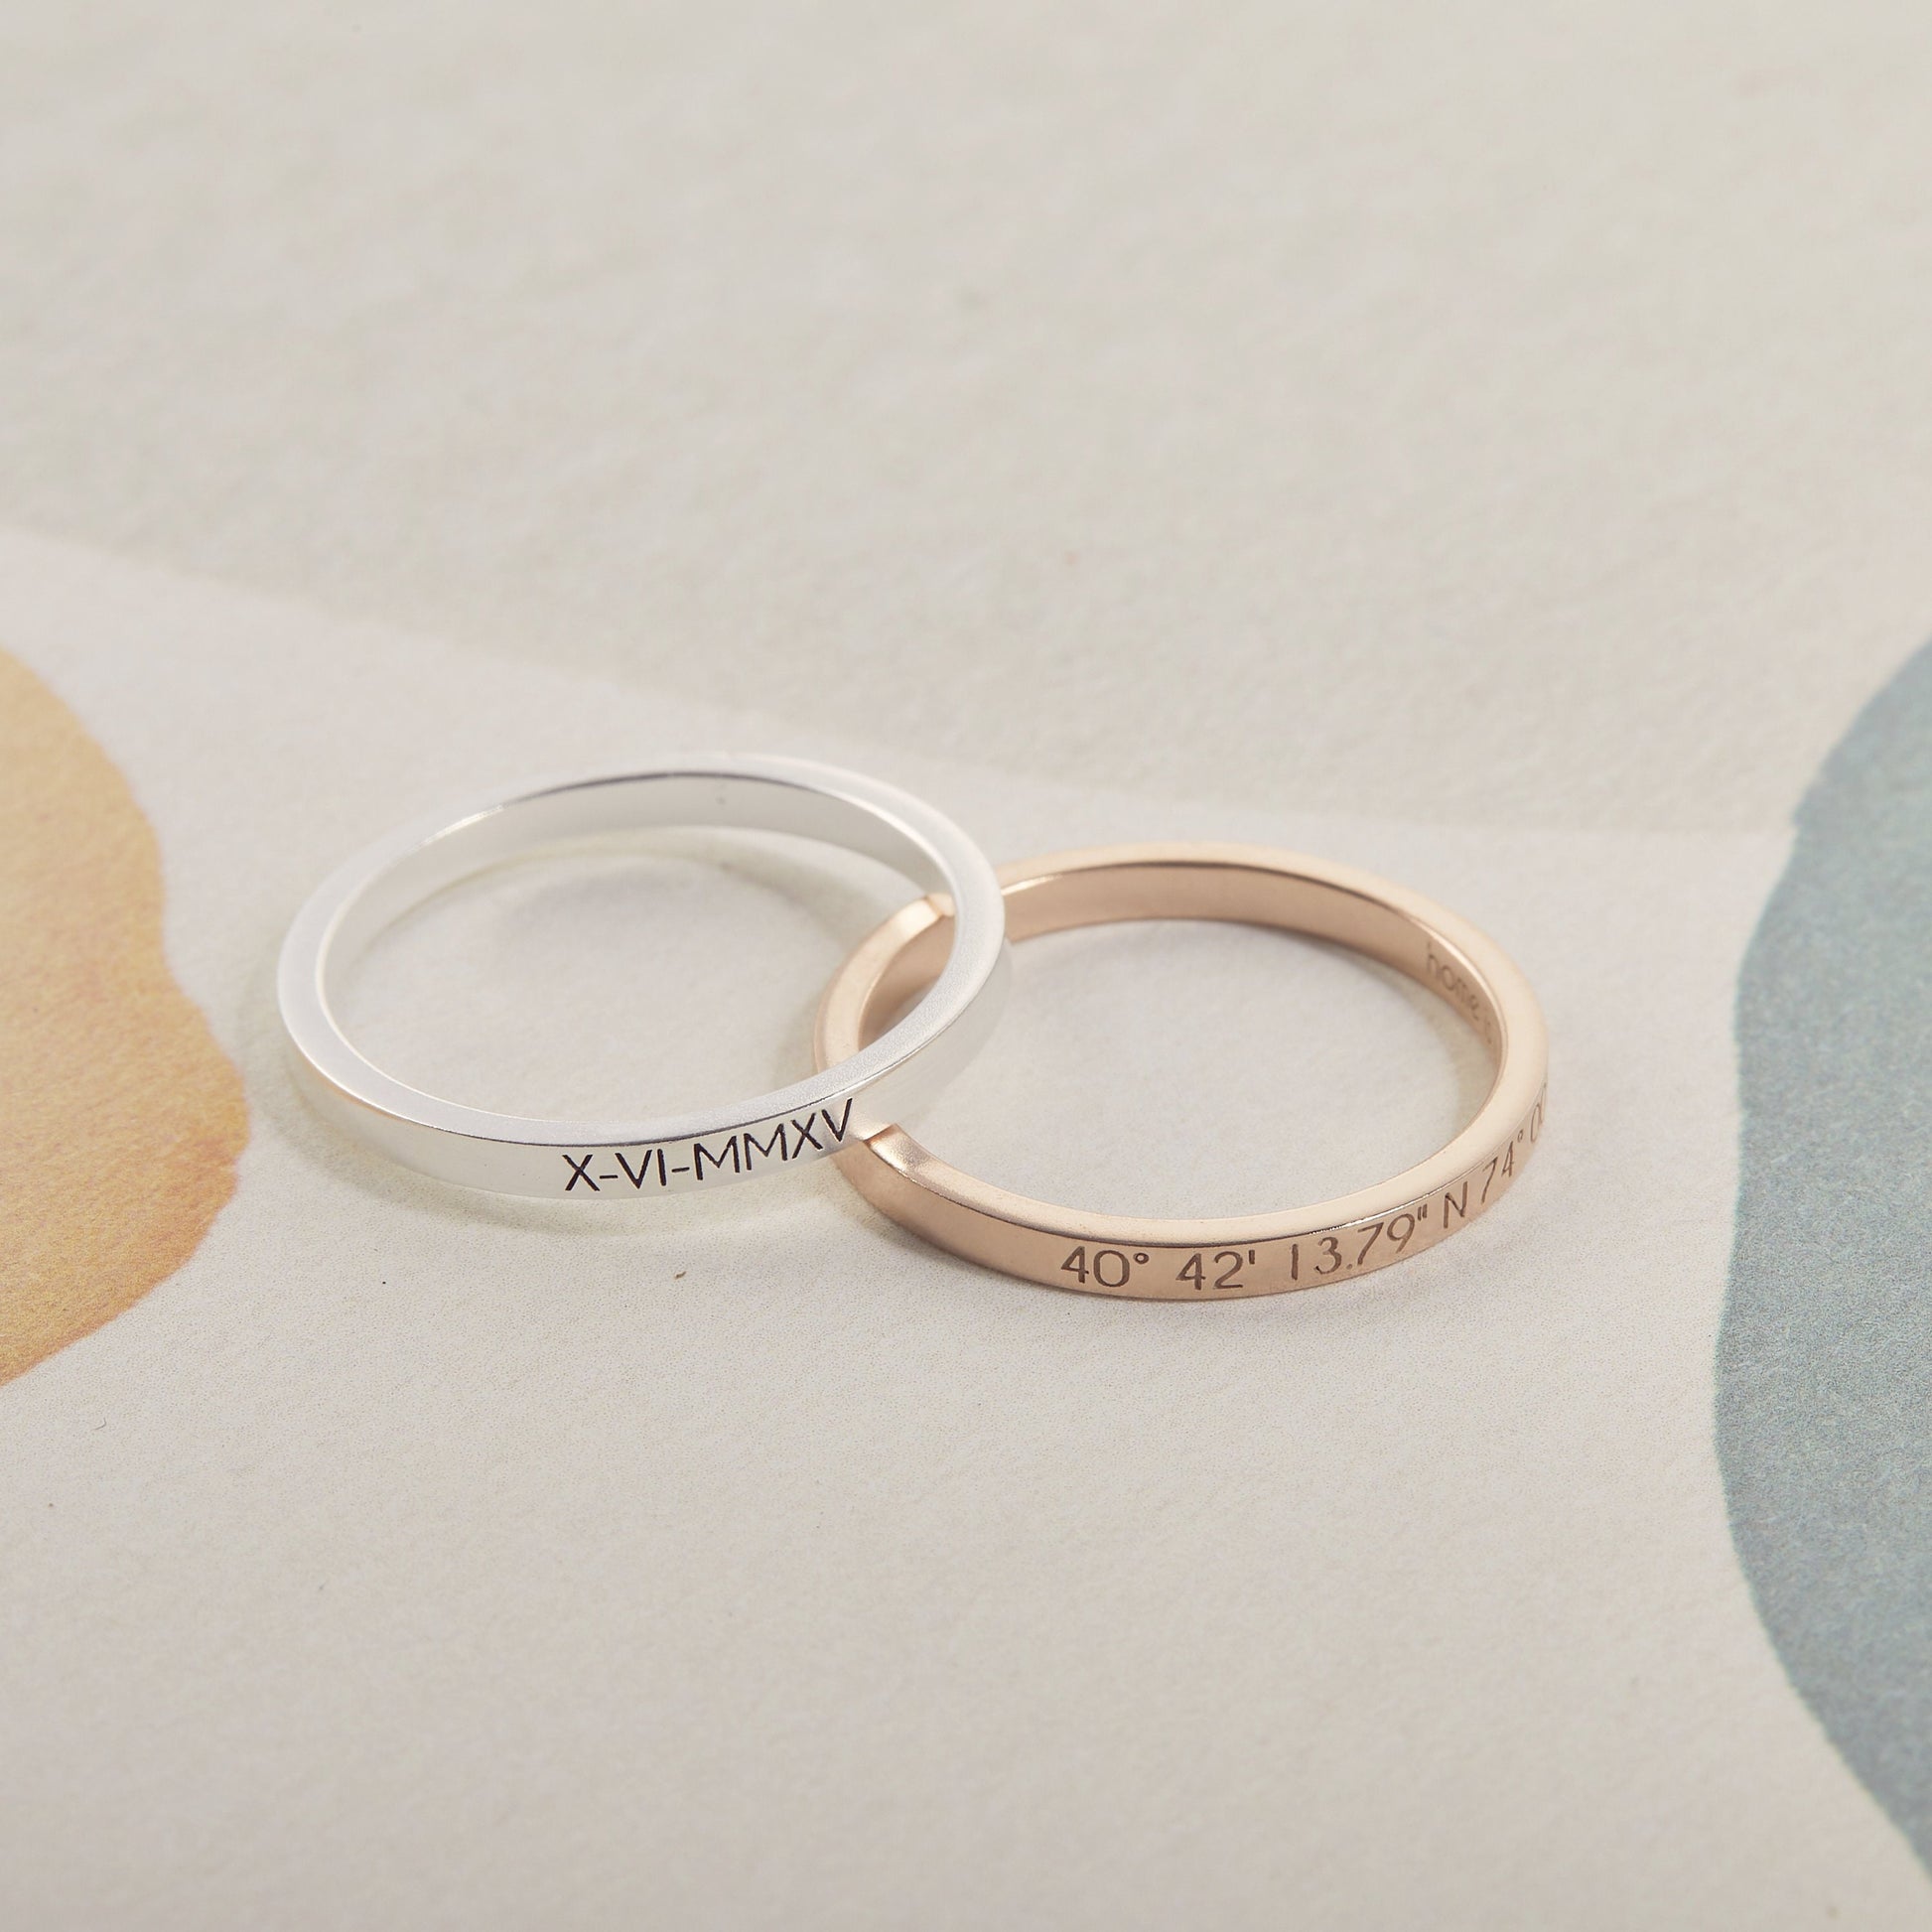 Custom Coordinate Ring | Engraved Dainty Ring | Name Ring | Promise Ring | Stackable Ring | Stacking Ring | Family Ring | Minimalist Ring